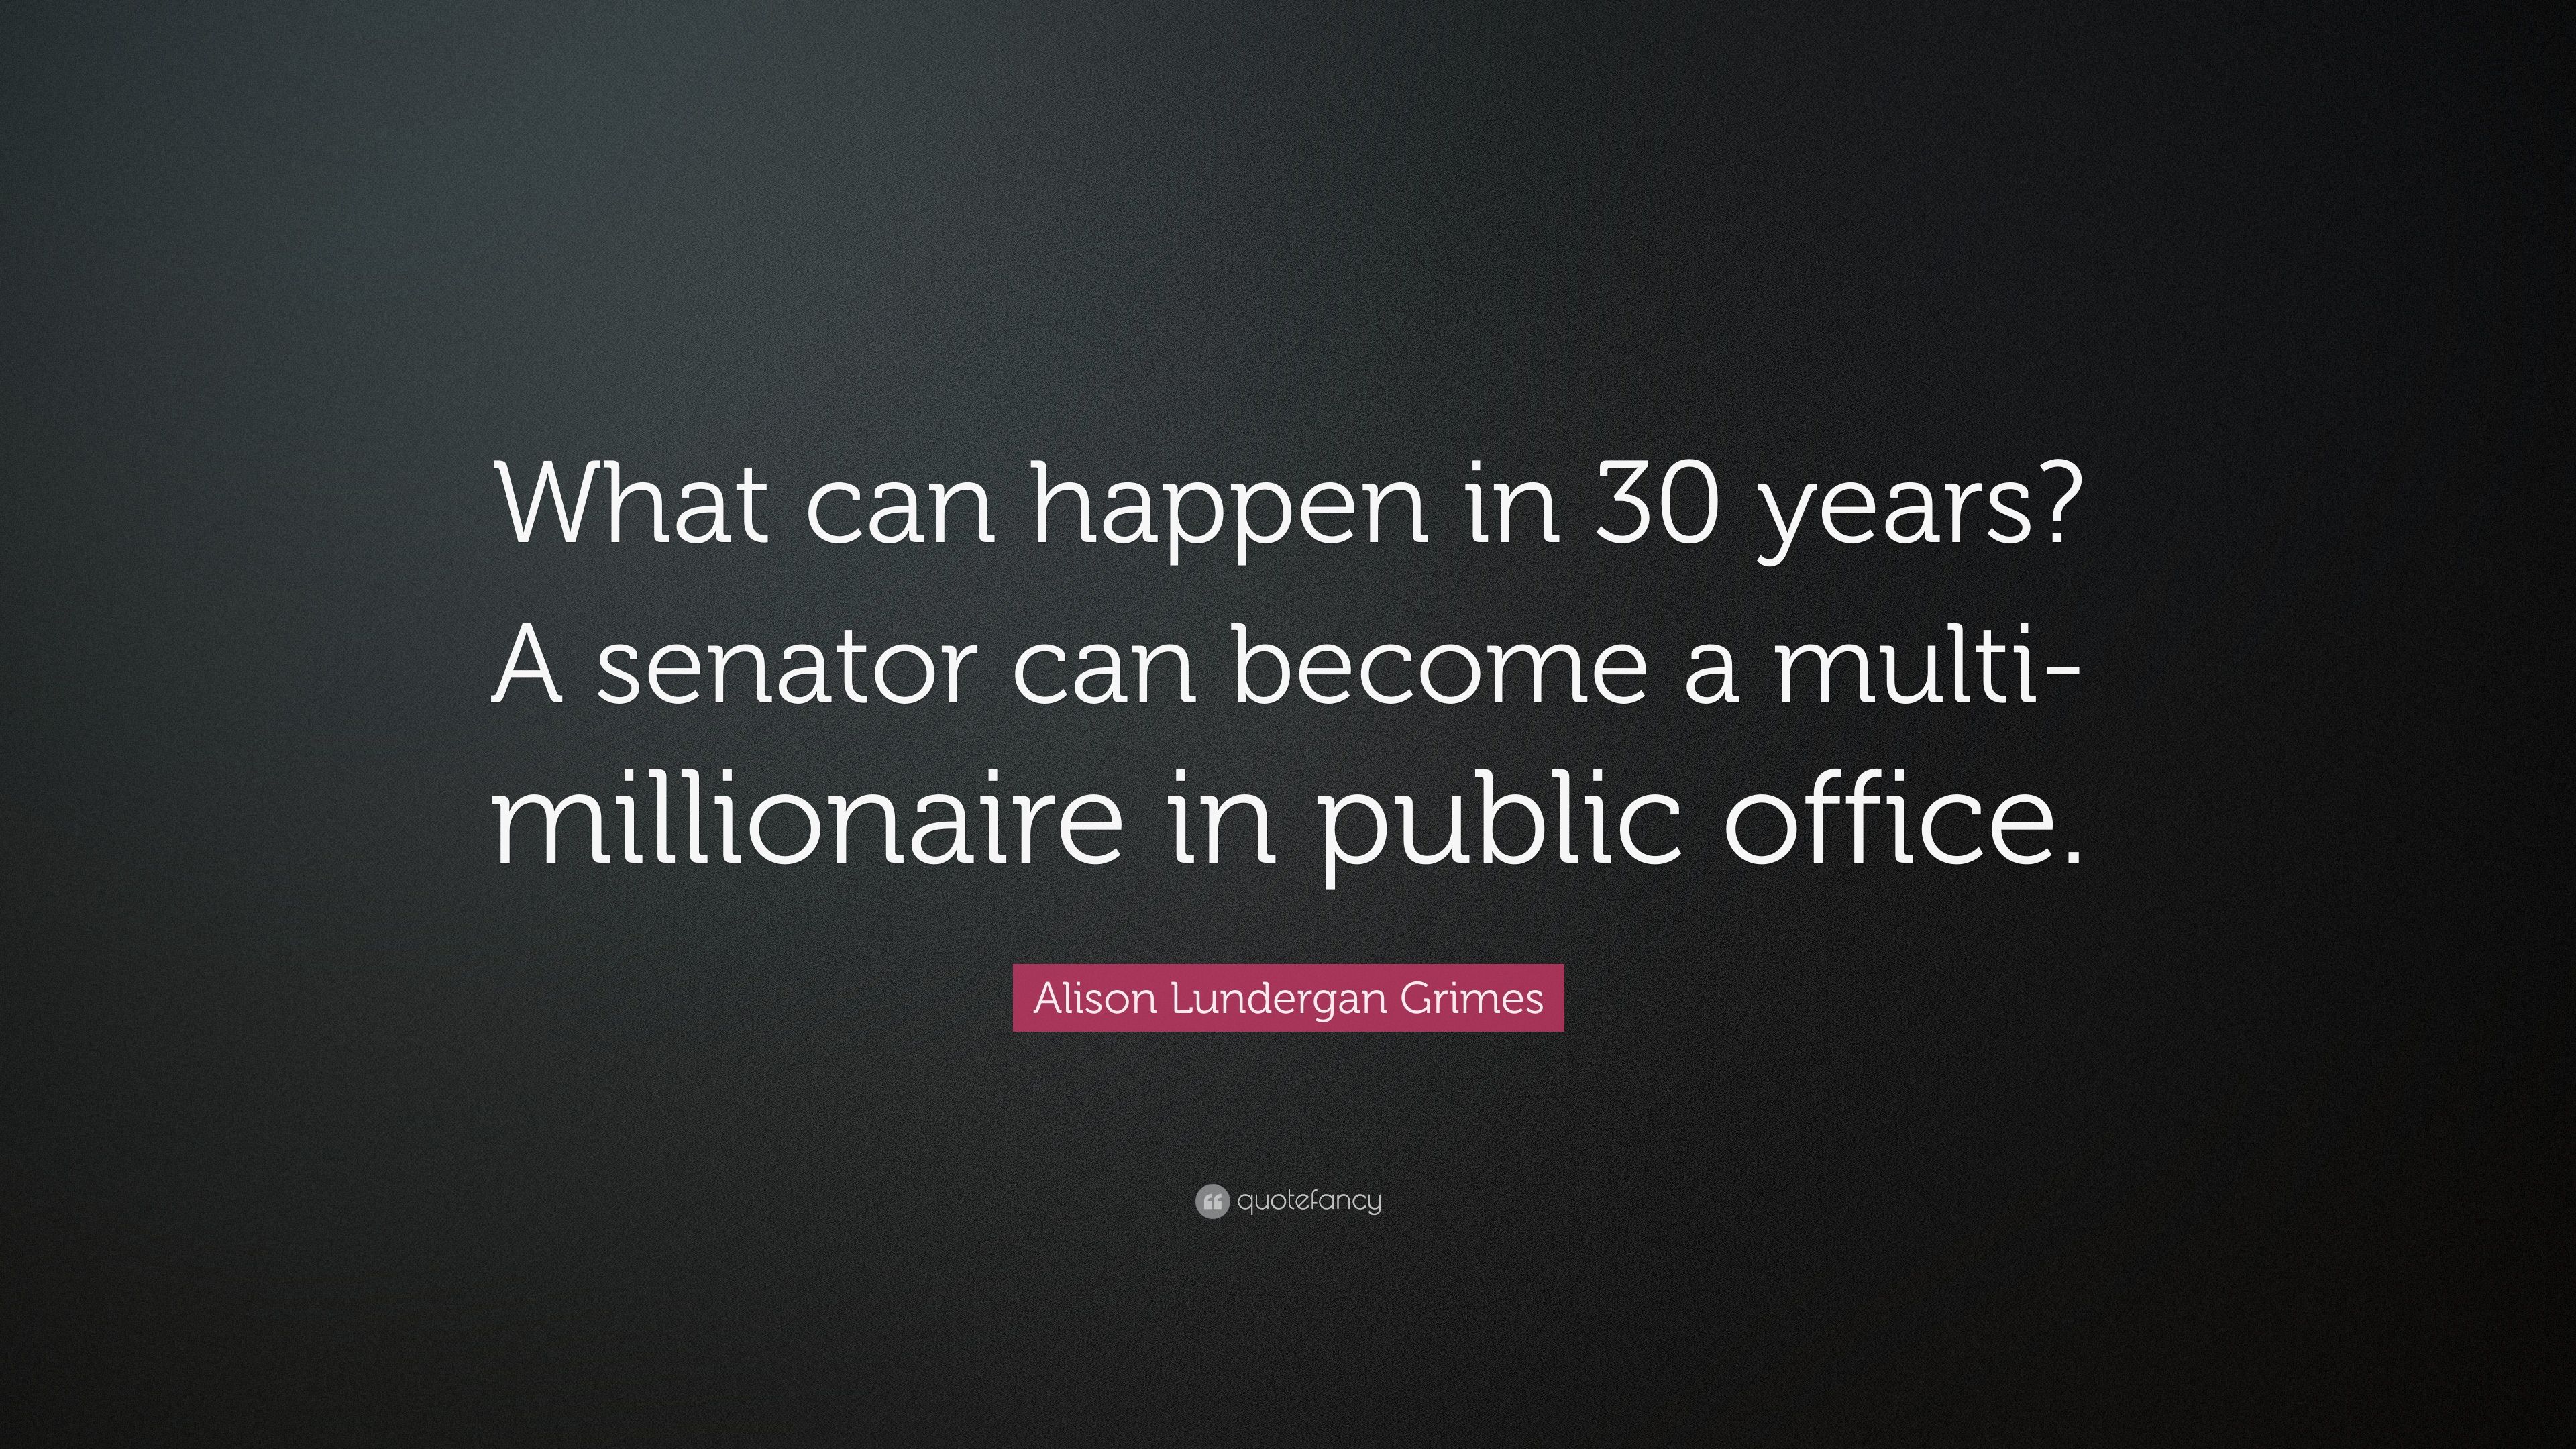 Alison Lundergan Grimes Quote: “What can happen in 30 years? A